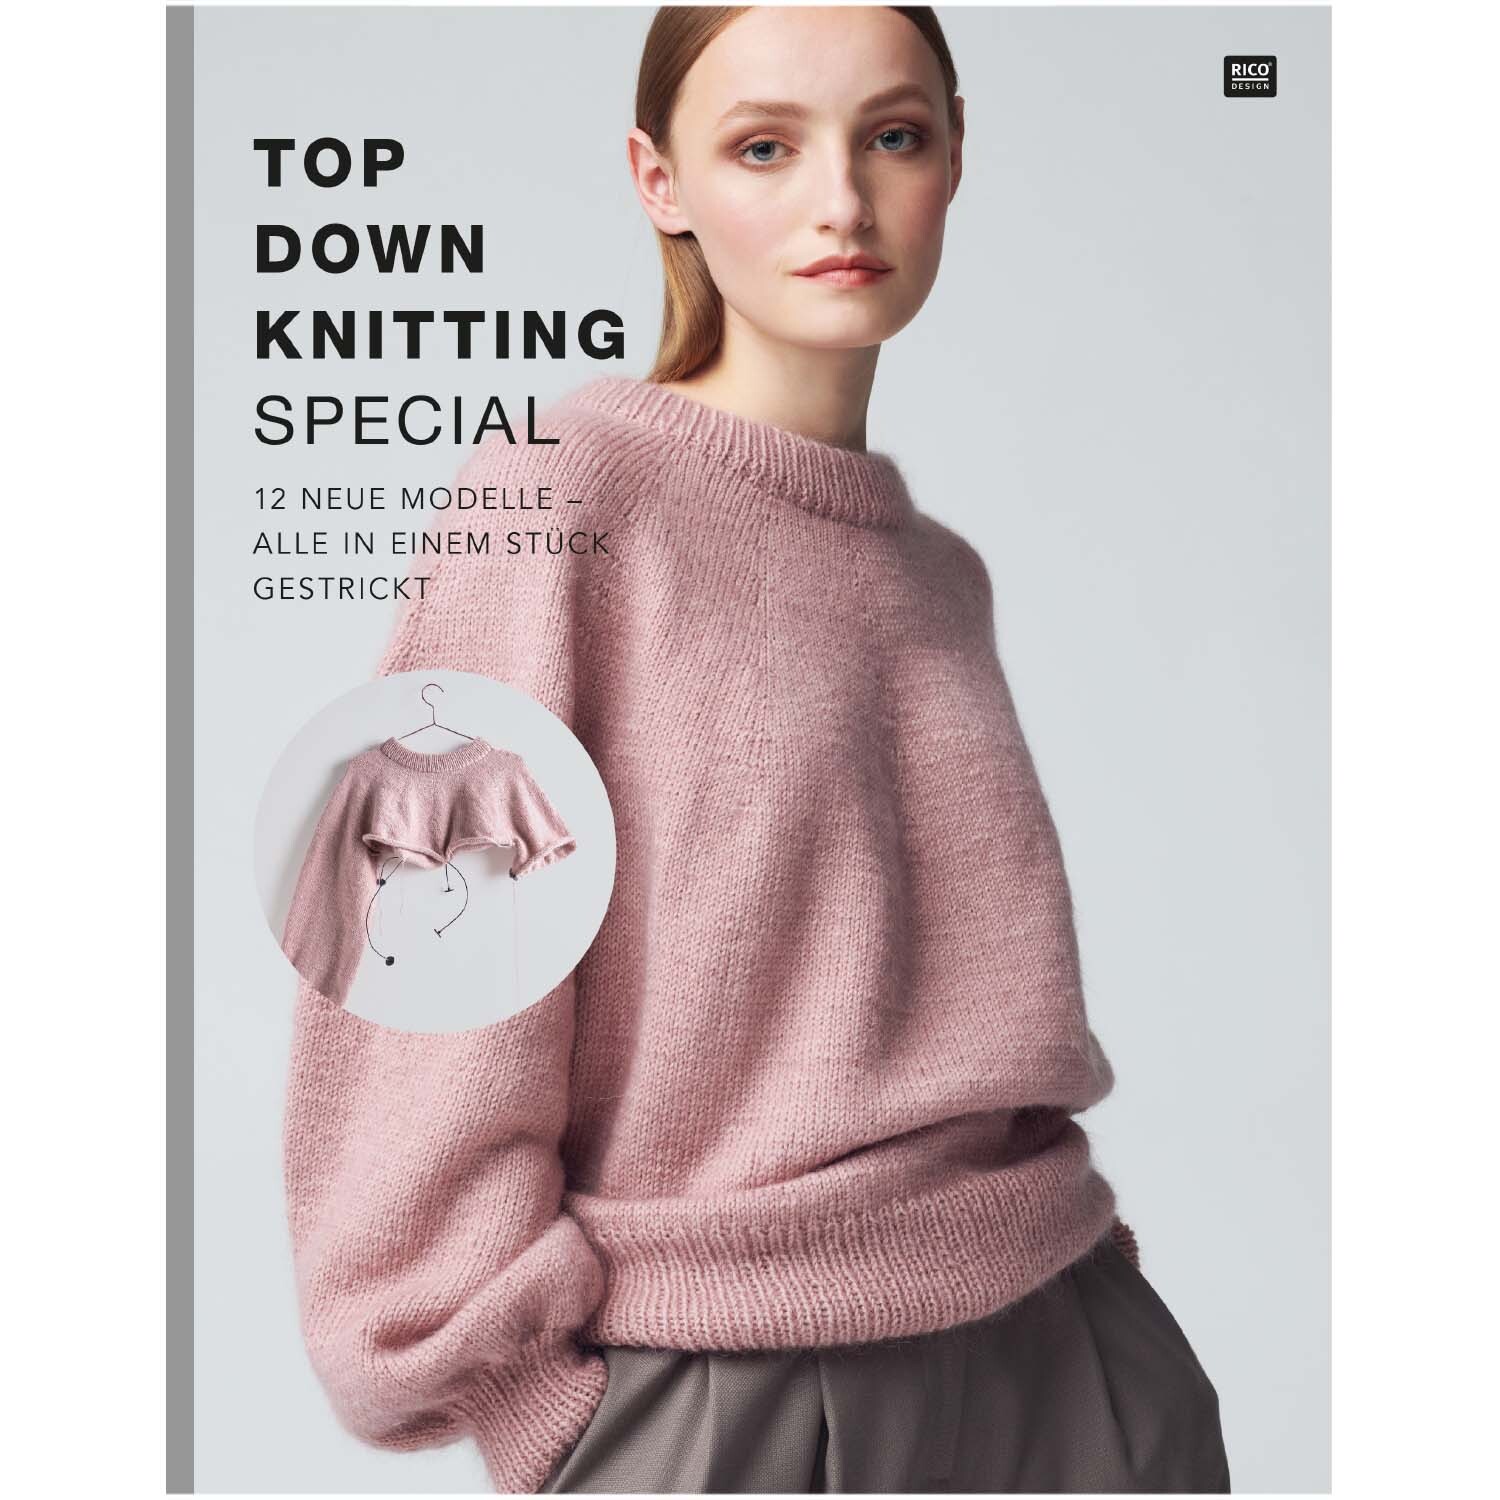 Top Down Knitting Special